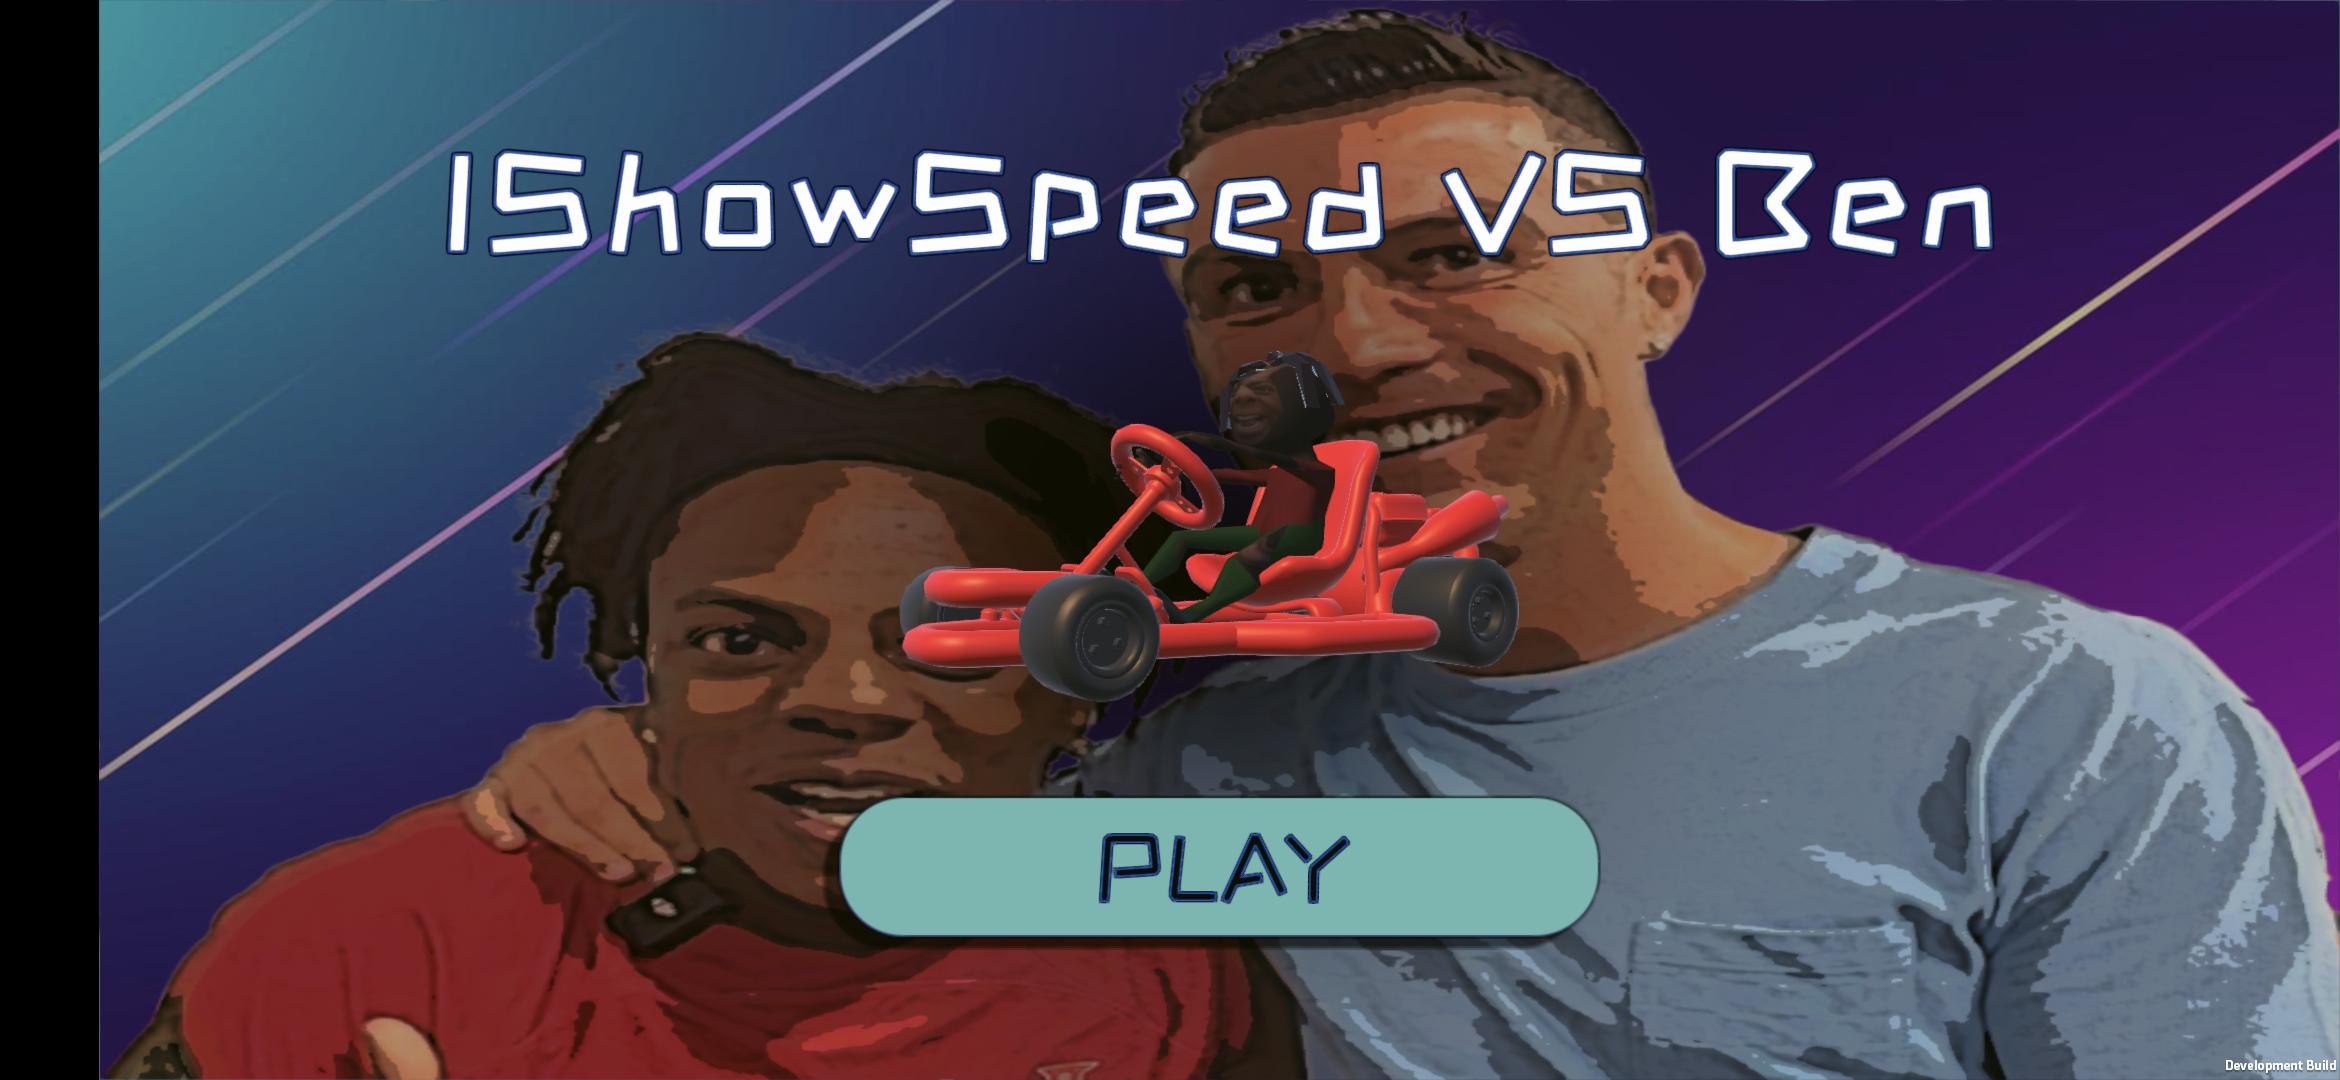 Ishowspeed Reddit? Epic so I made a game of Ishowspeed but his in